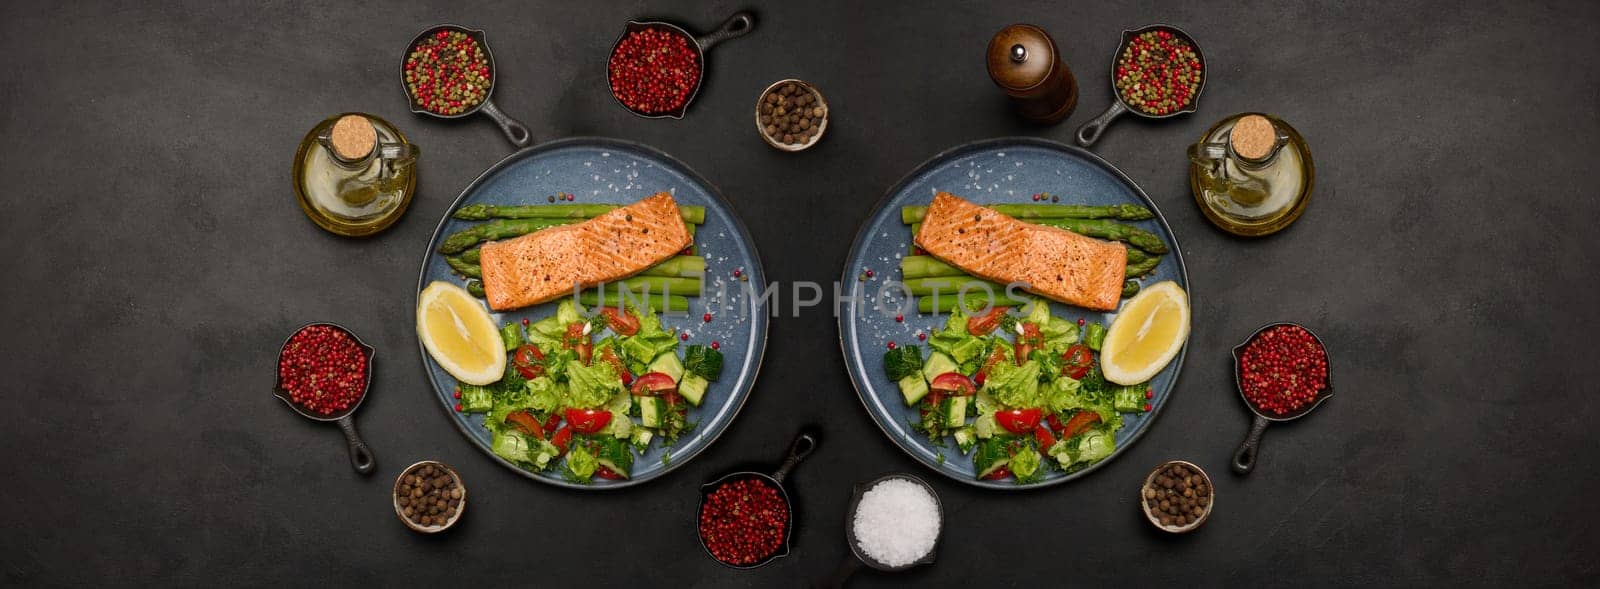 Healthy lunch with grilled trout with asparagus and fresh tomato and cucumber salad, a lemon slice. Food on a blue round plate by ndanko